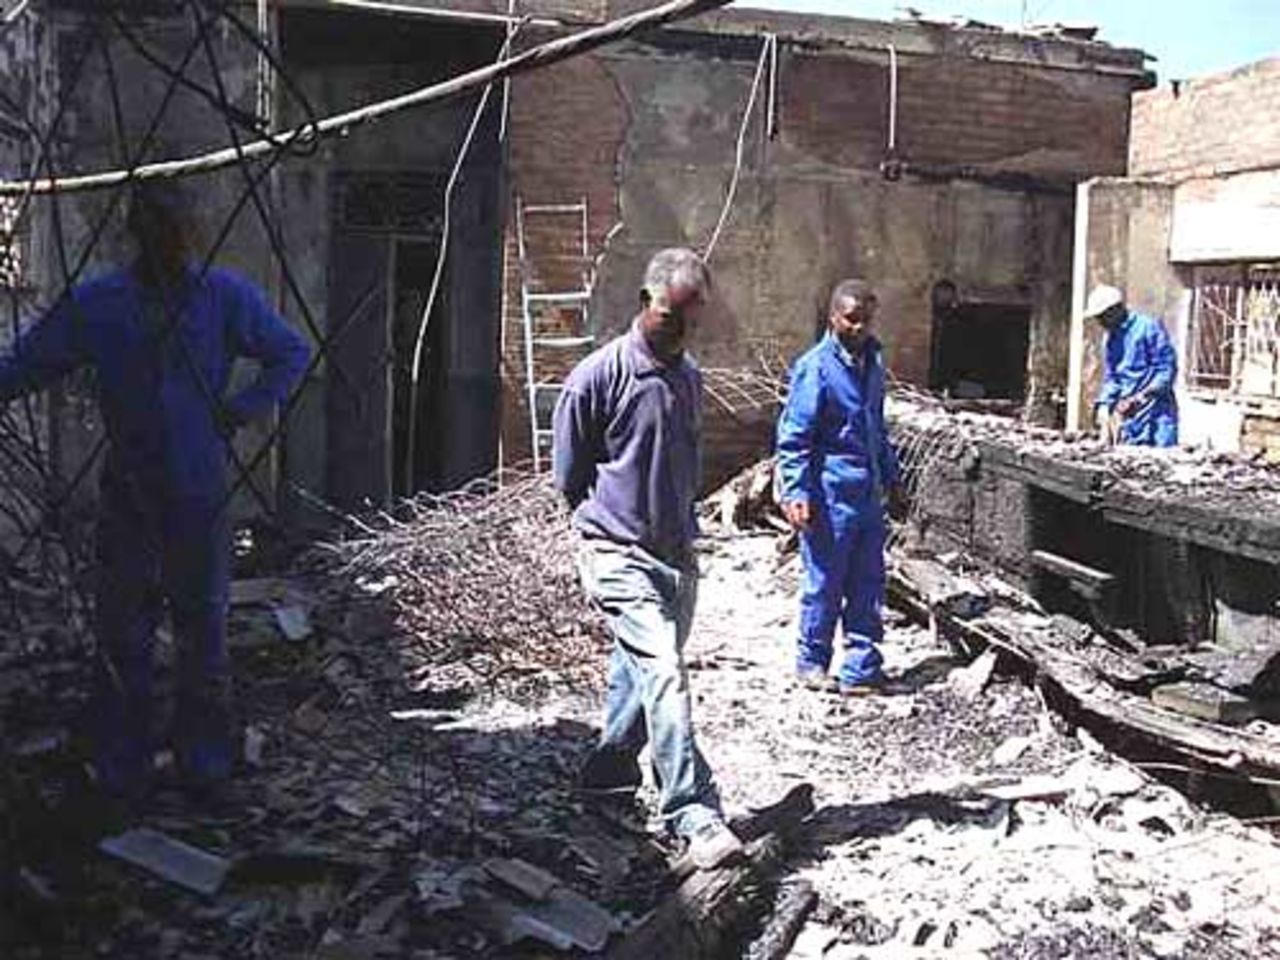 The Bulawayo Athletic Club, which was seriously damaged by an electrical fire in August